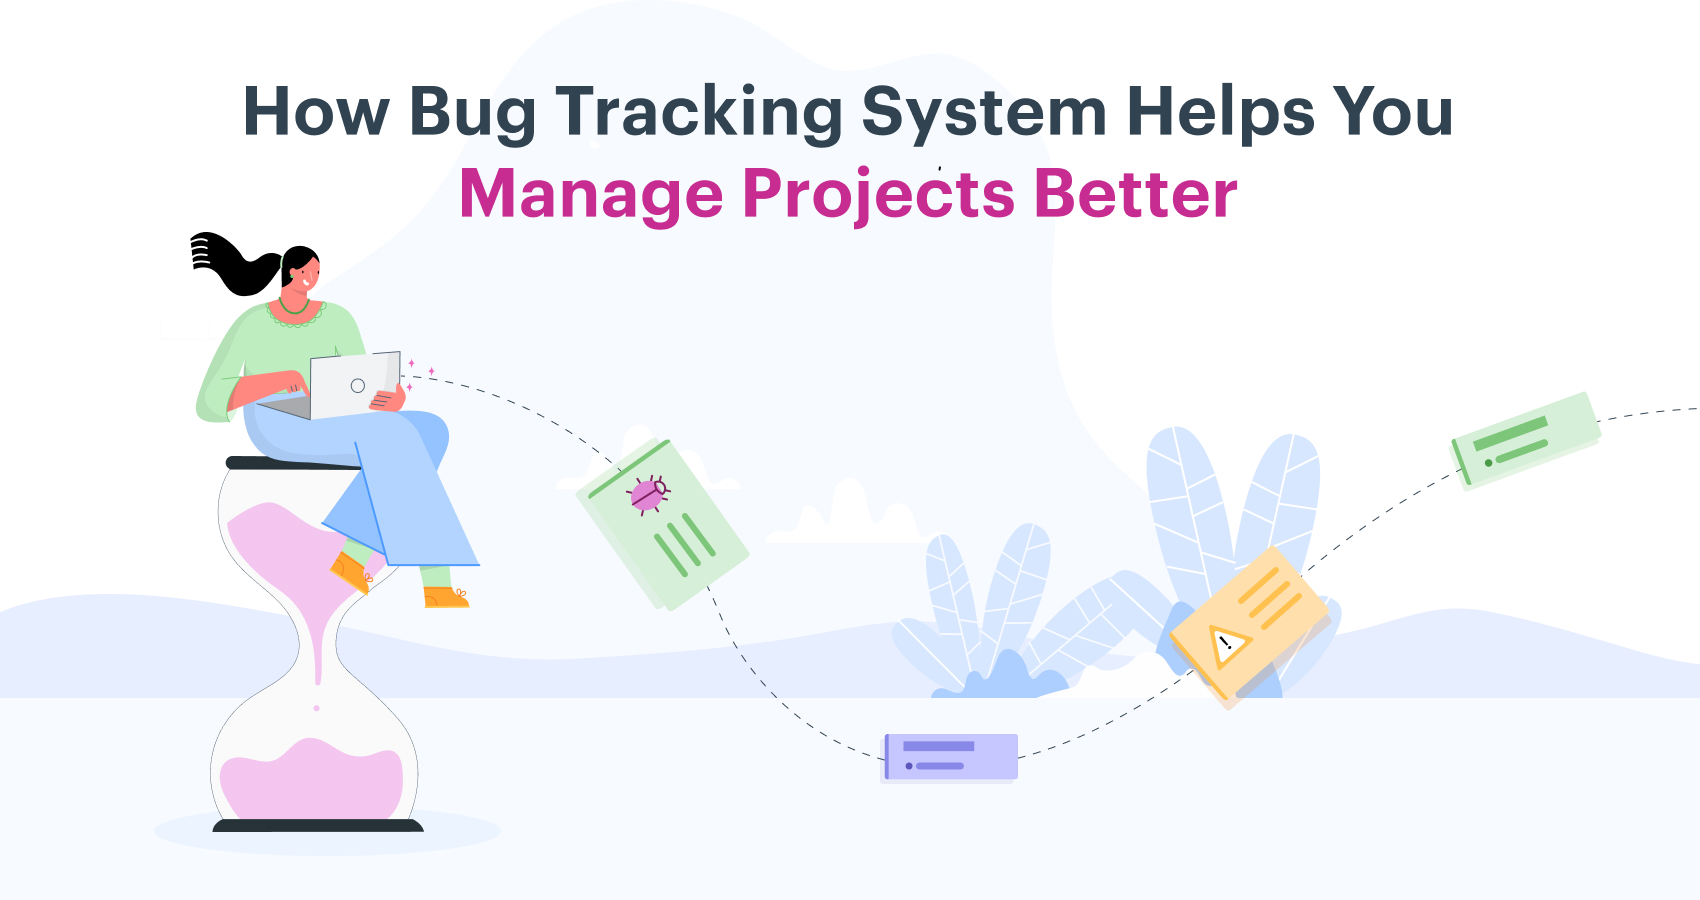 How Bug Tracking System Helps You Manage Projects Better